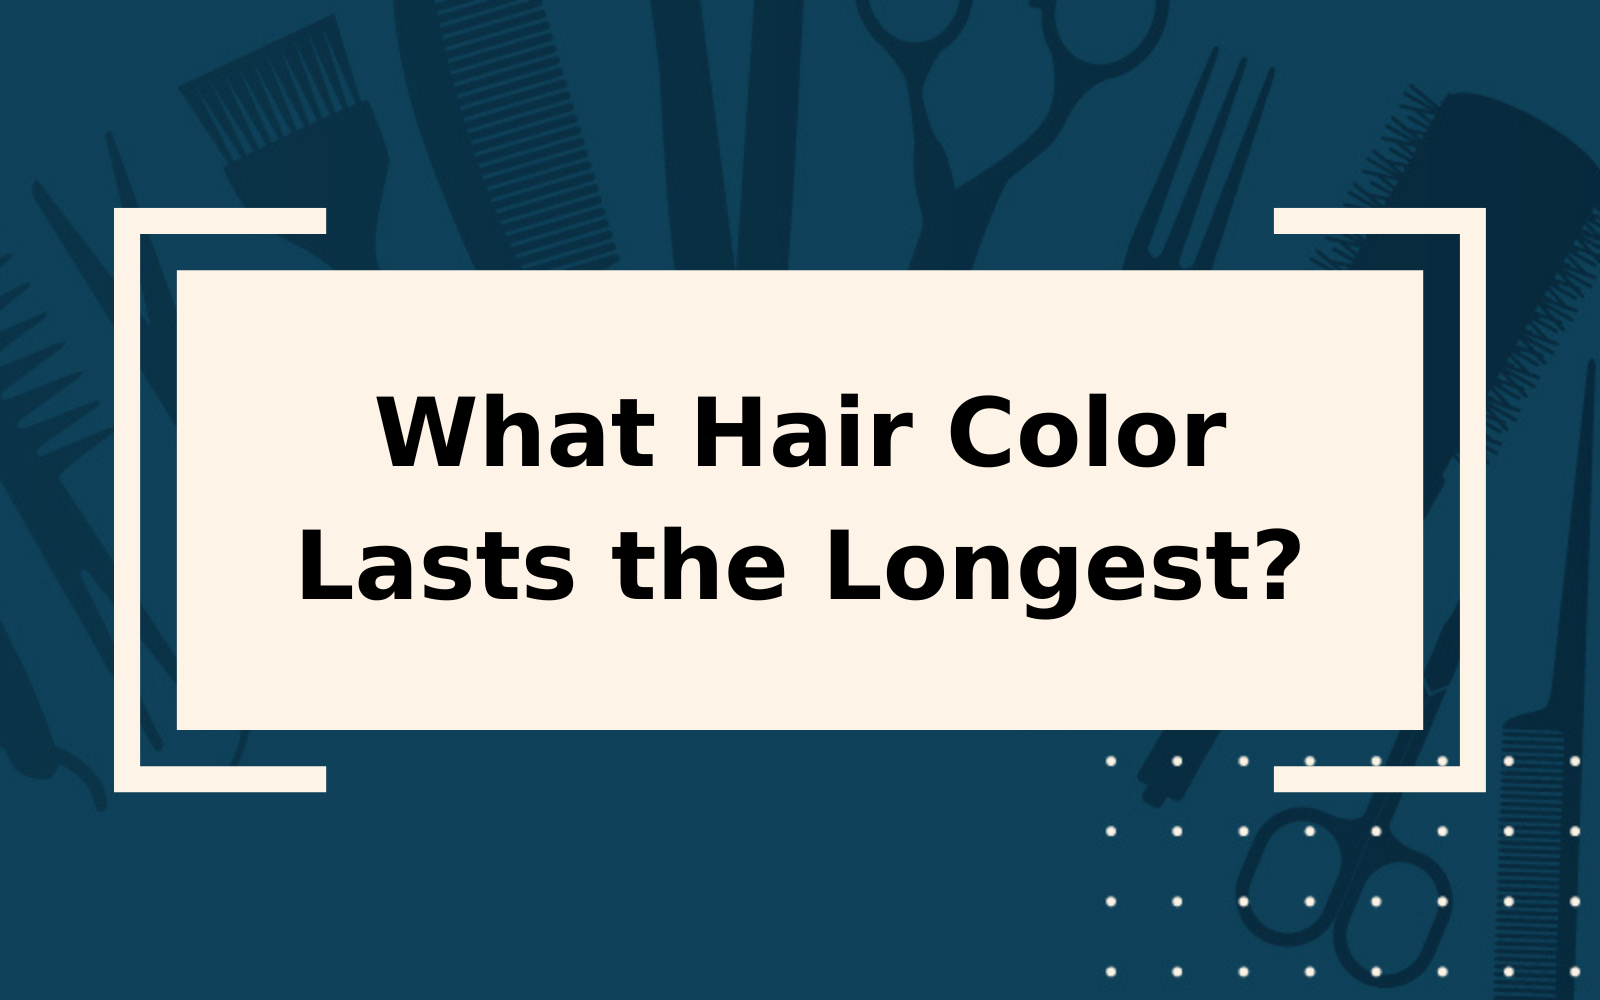 What Hair Color Lasts the Longest in 2022?